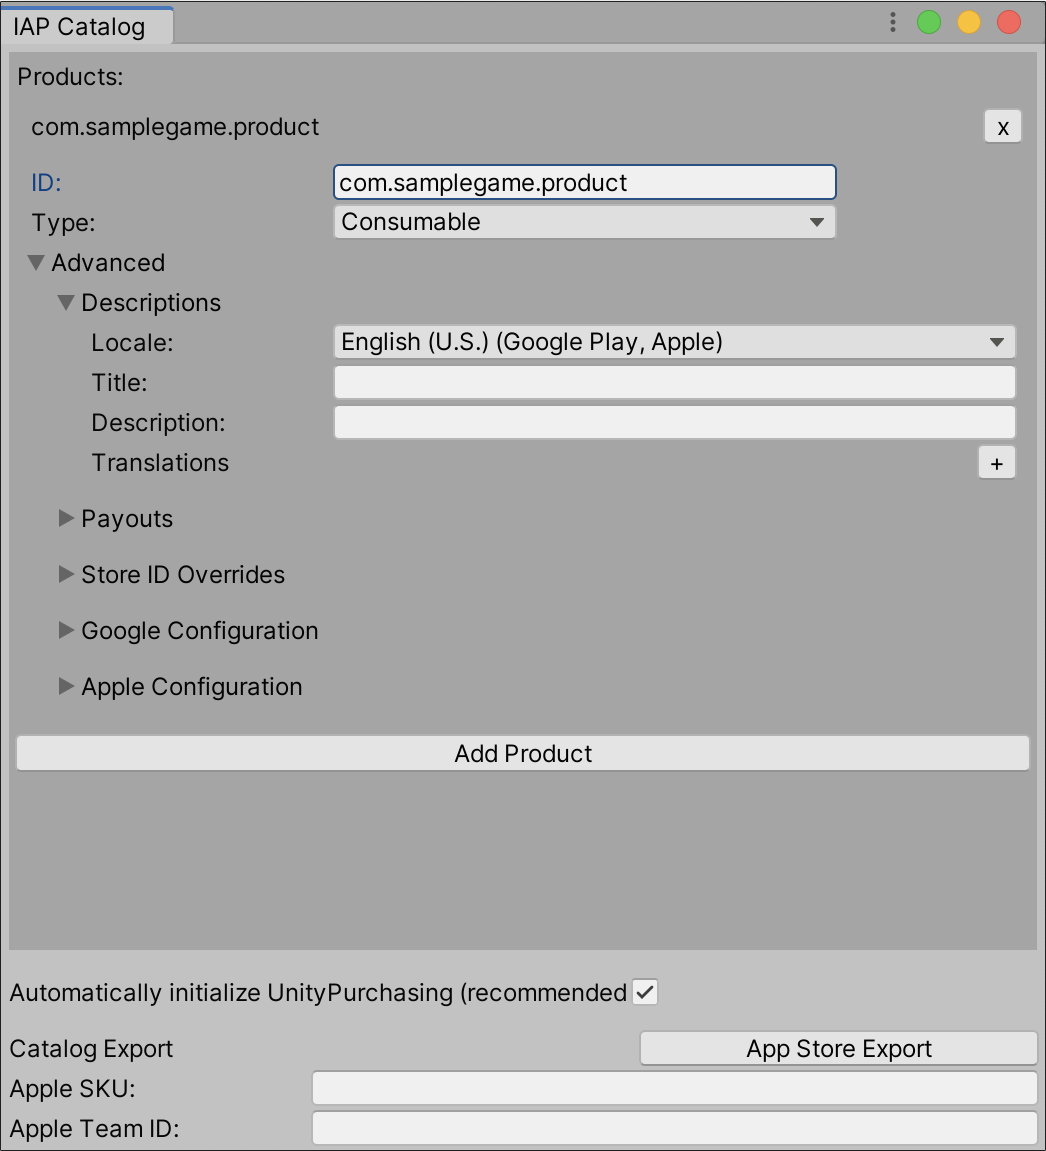 Populating Product information in the IAP Catalog GUI